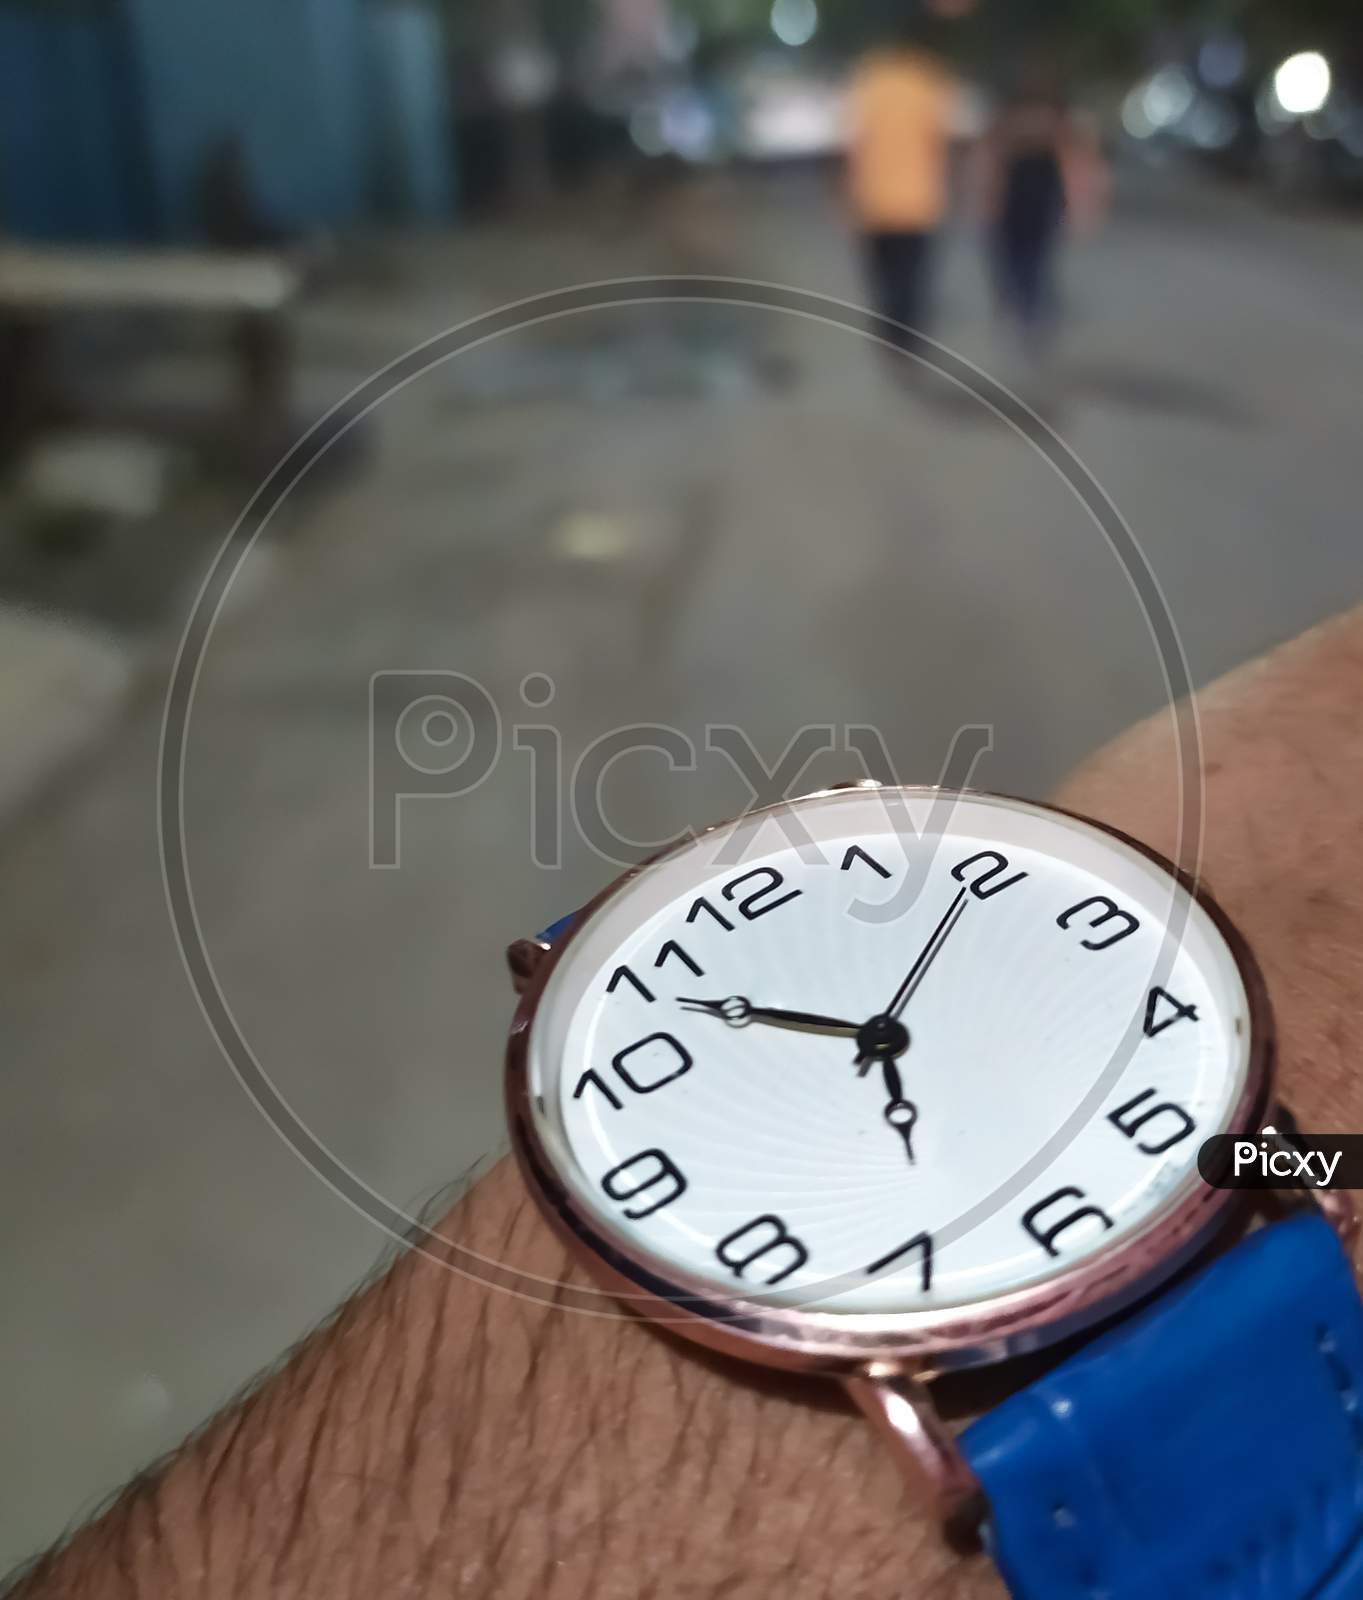 Checking time in wrist watch at almost seven in evening